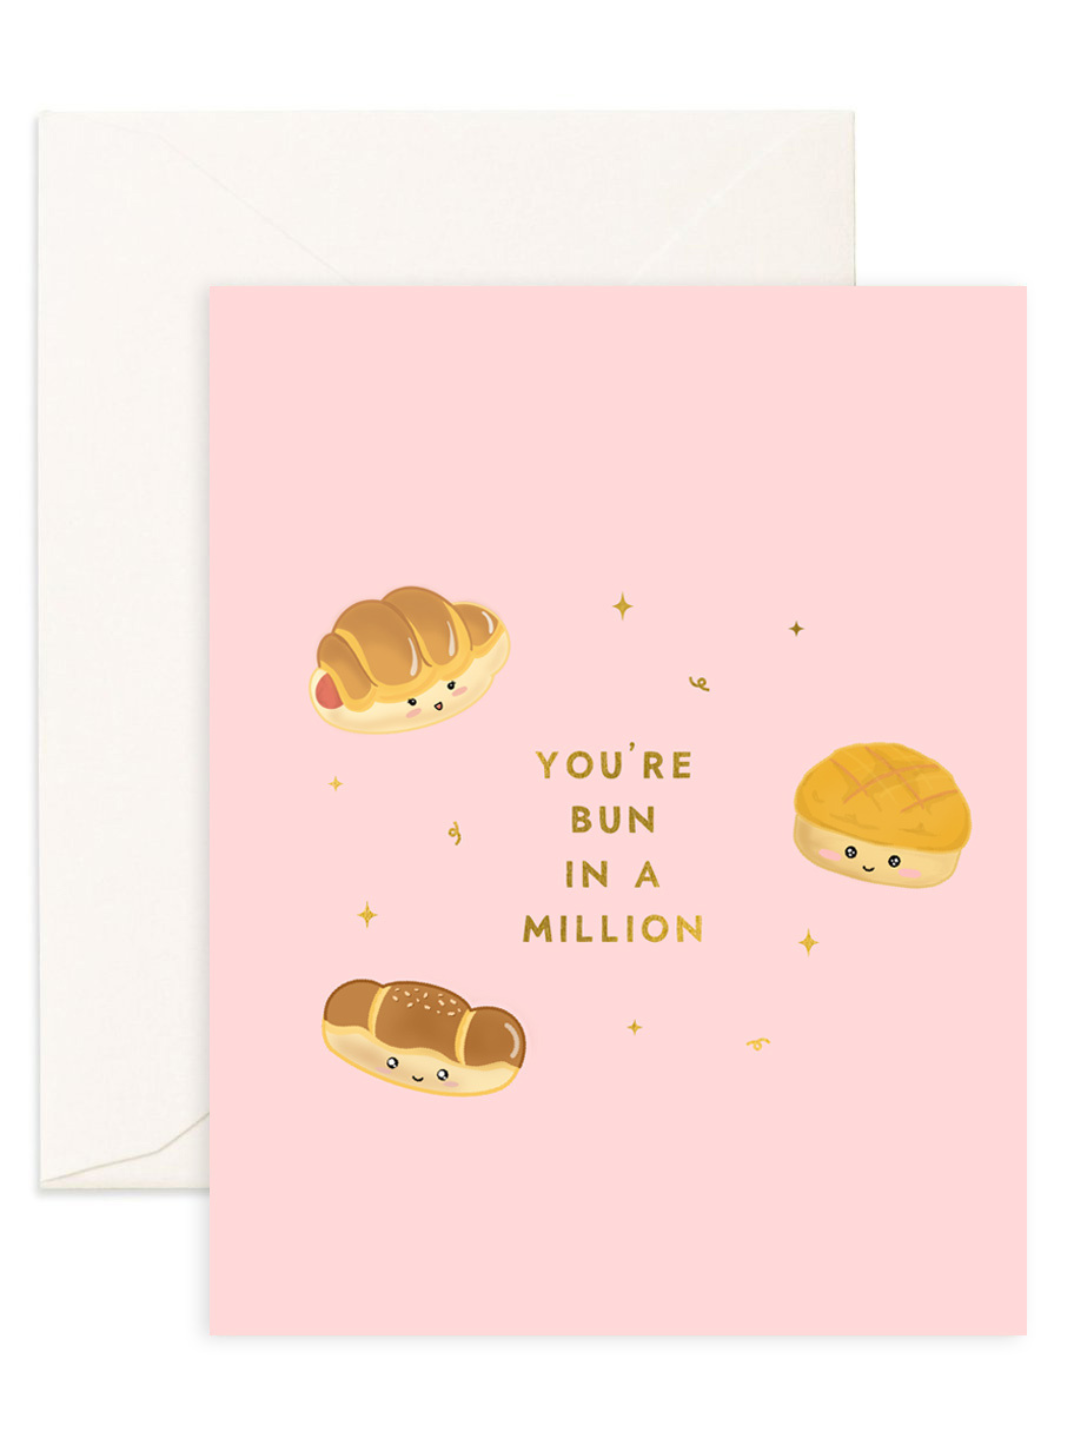 Eco-friendly greeting card printed on recycled paper cute food-inspired design shop sustainable ethical brands women-owned brands kind on the planet bakery buns Hong Kong foodie